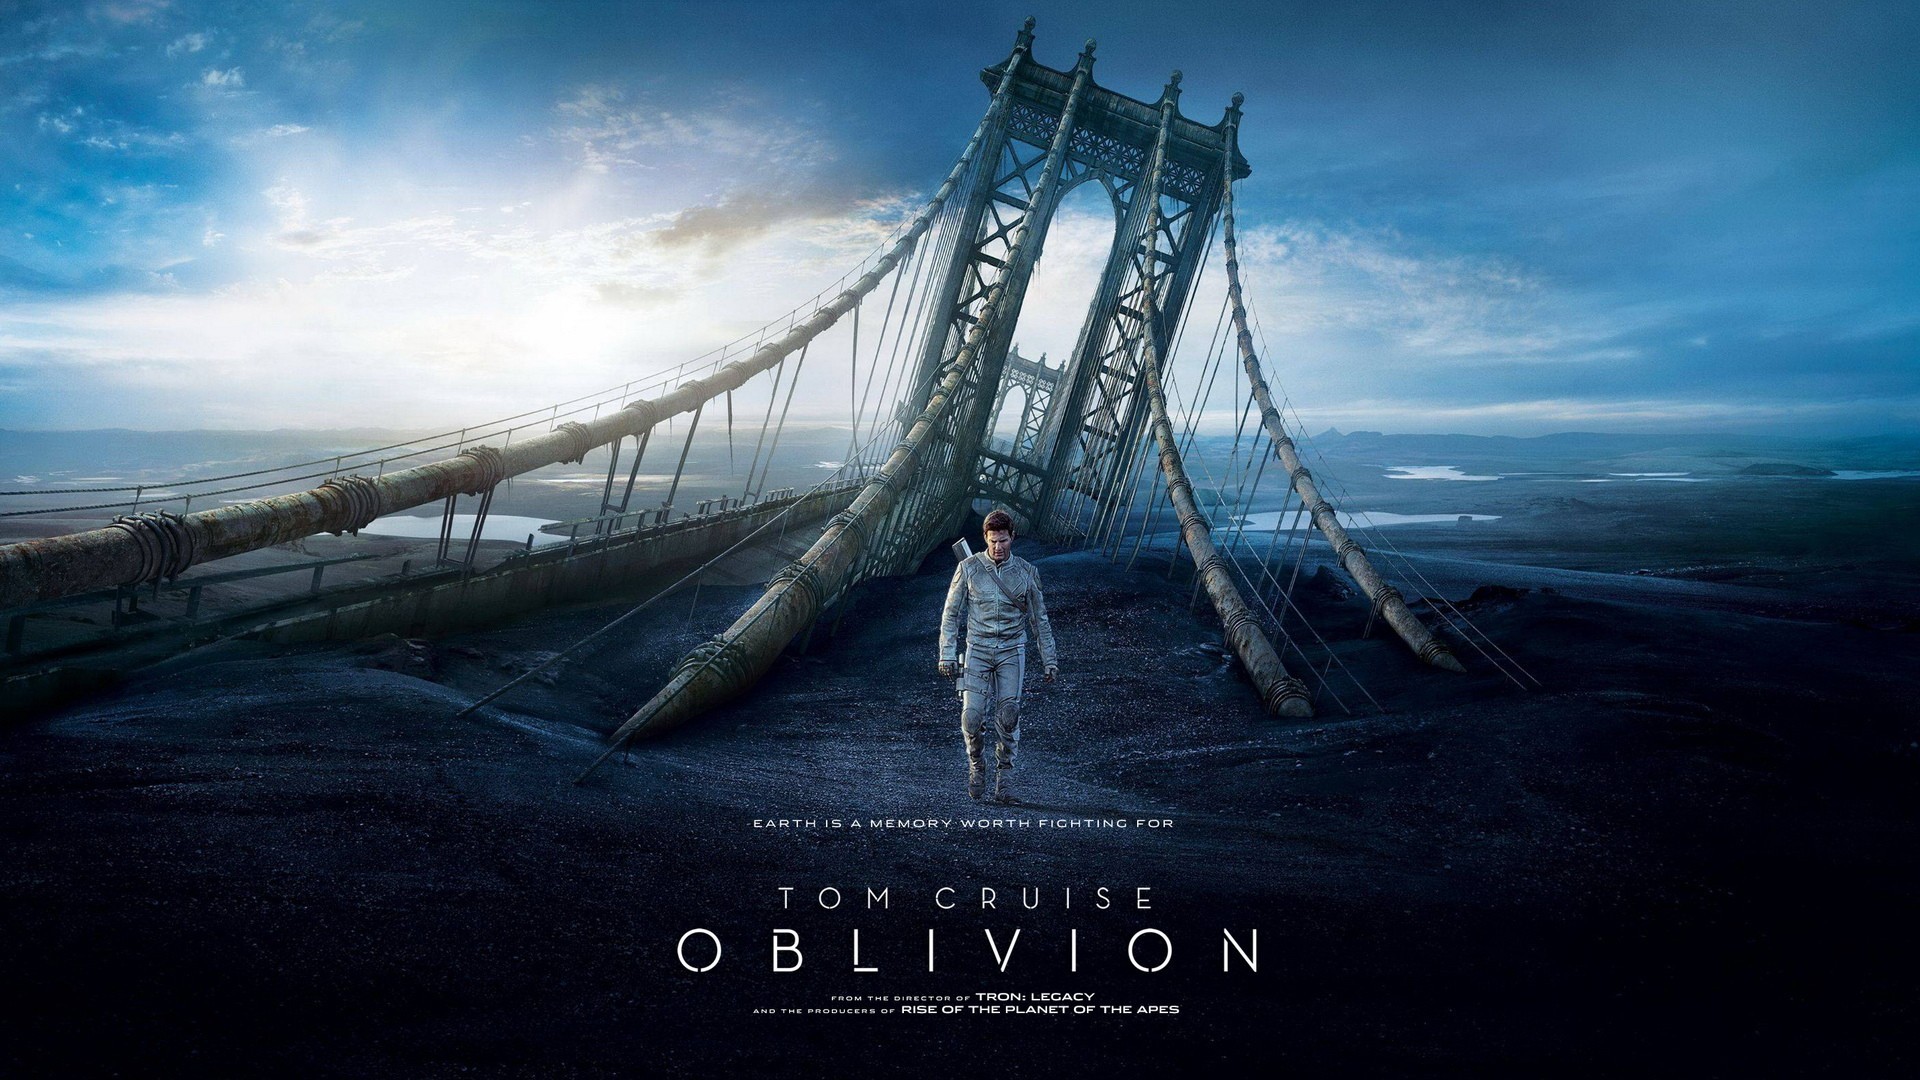 General 1920x1080 movies Oblivion (movie) 2013 (Year) Monolith Universal Pictures Tom Cruise actor